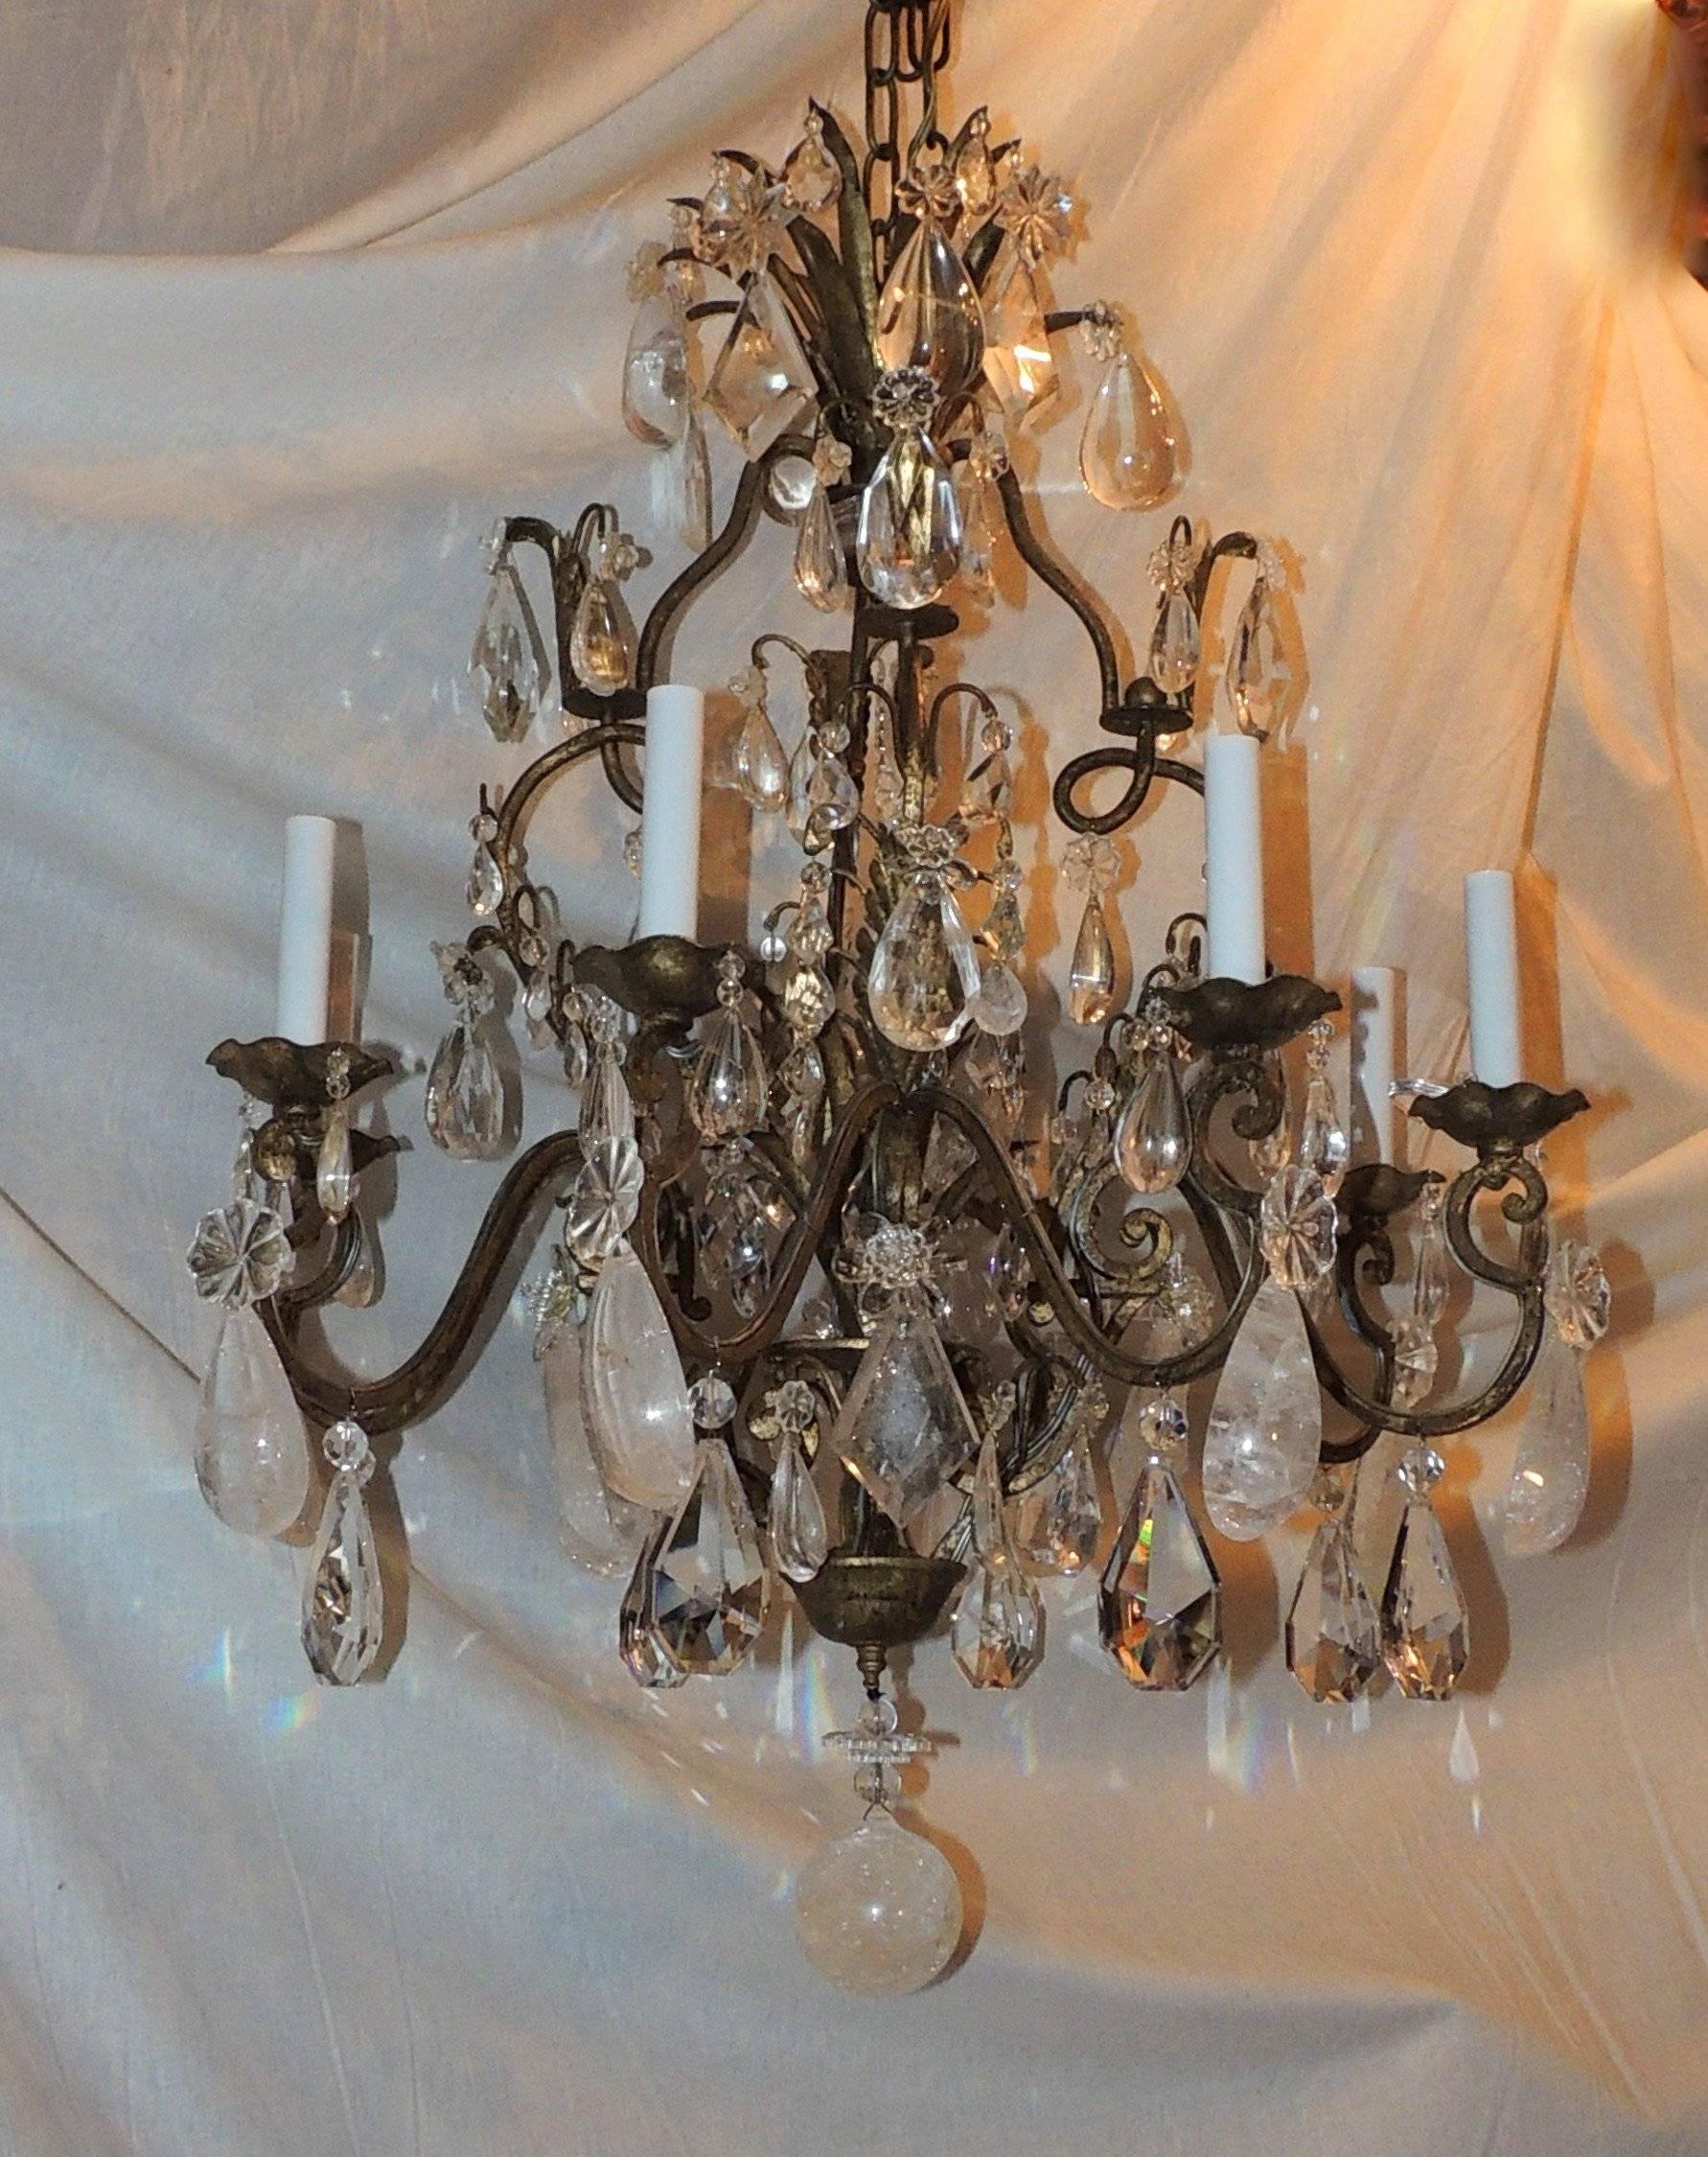 A wonderful Mid-Century Modern vintage Baguès style rock and cut crystal gilt Jansen period chandelier eight-light fixture.
Completely rewired and ready to enjoy.

Measures: 26